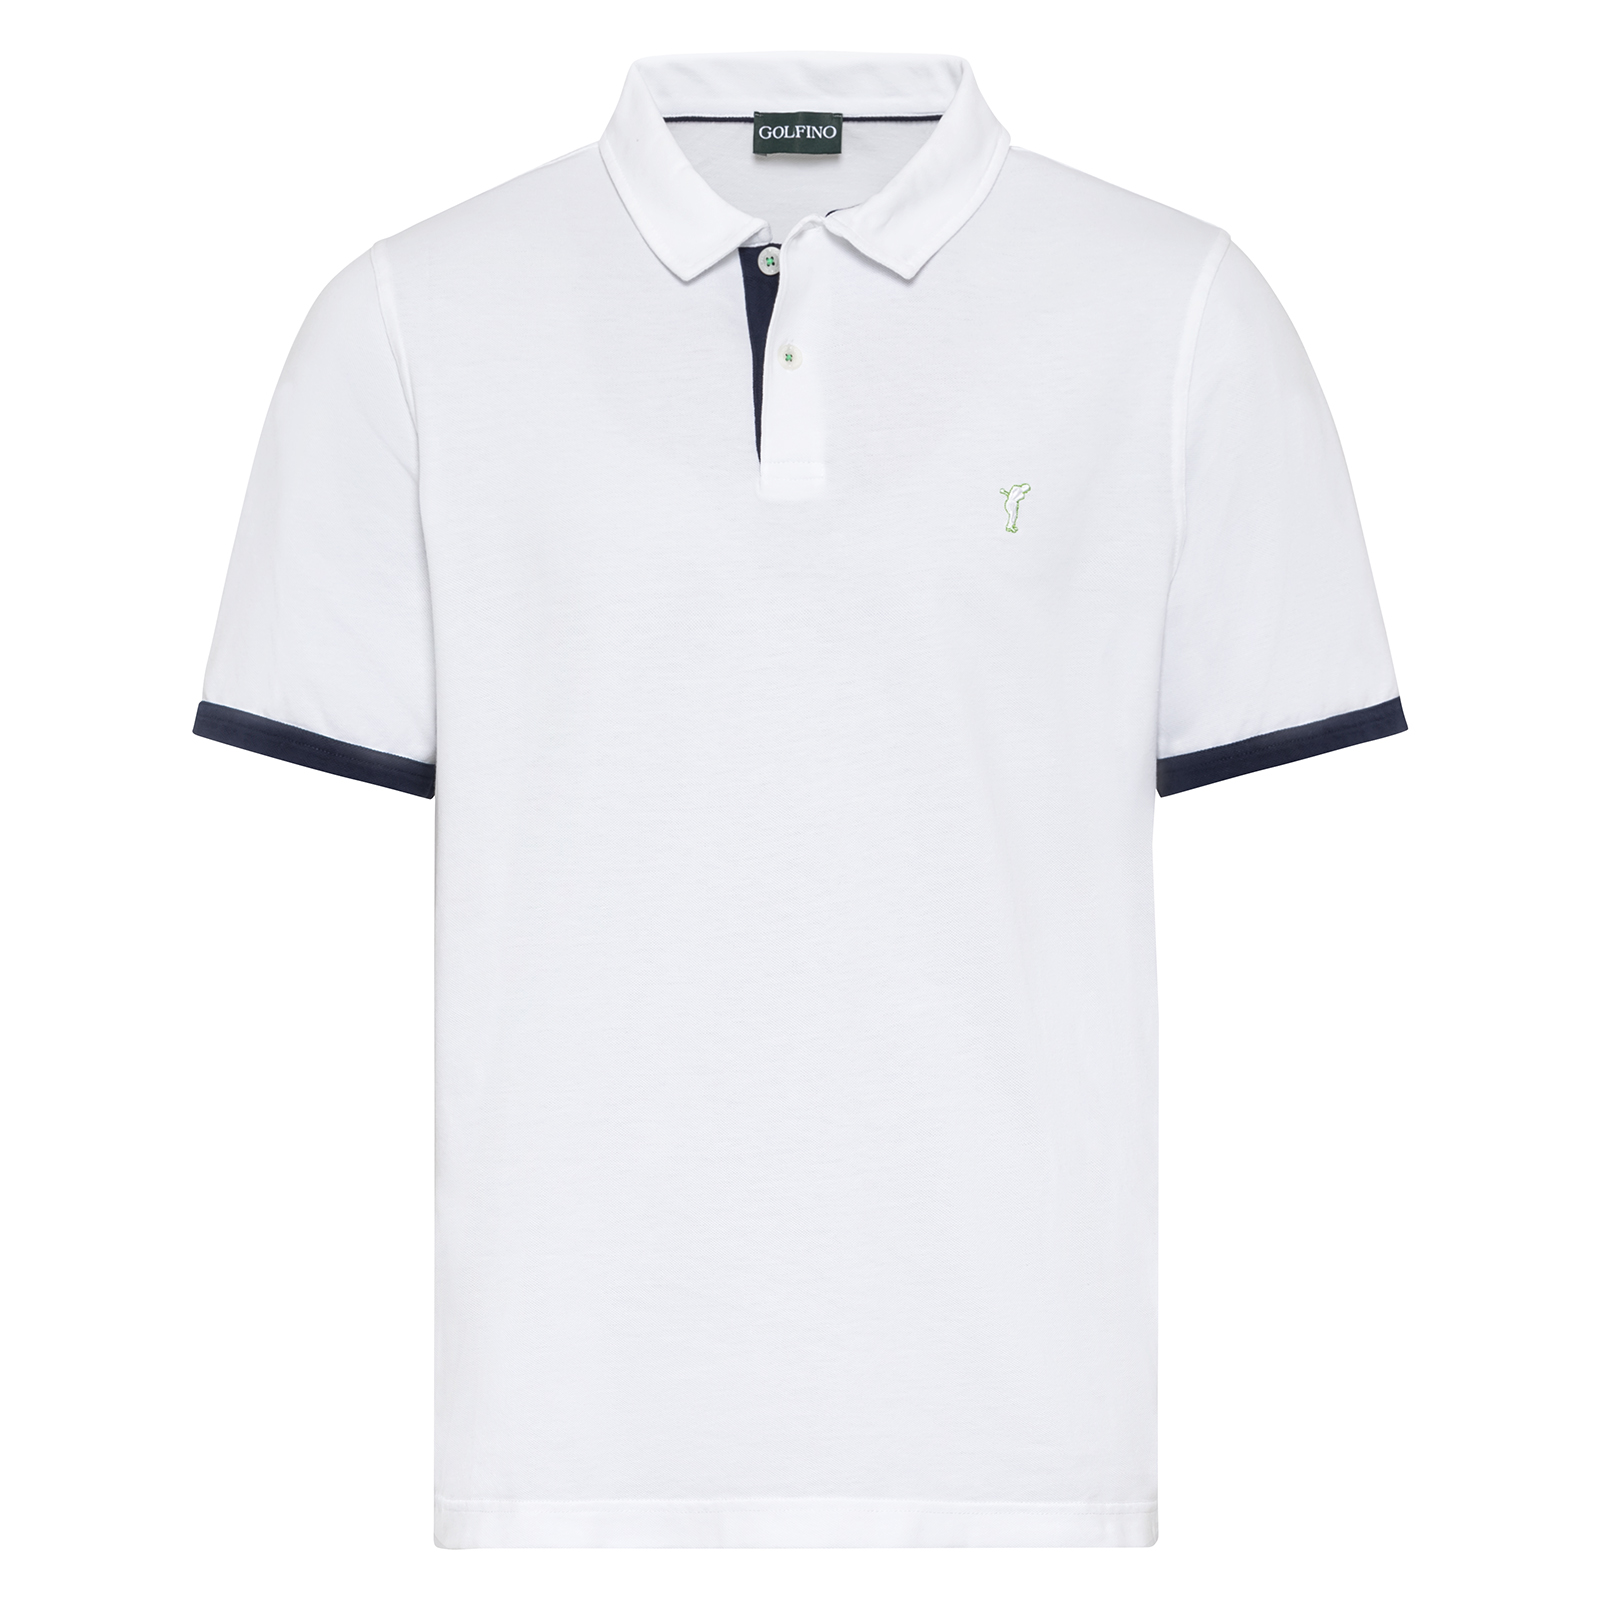 Men's golf polo shirt with stretch component